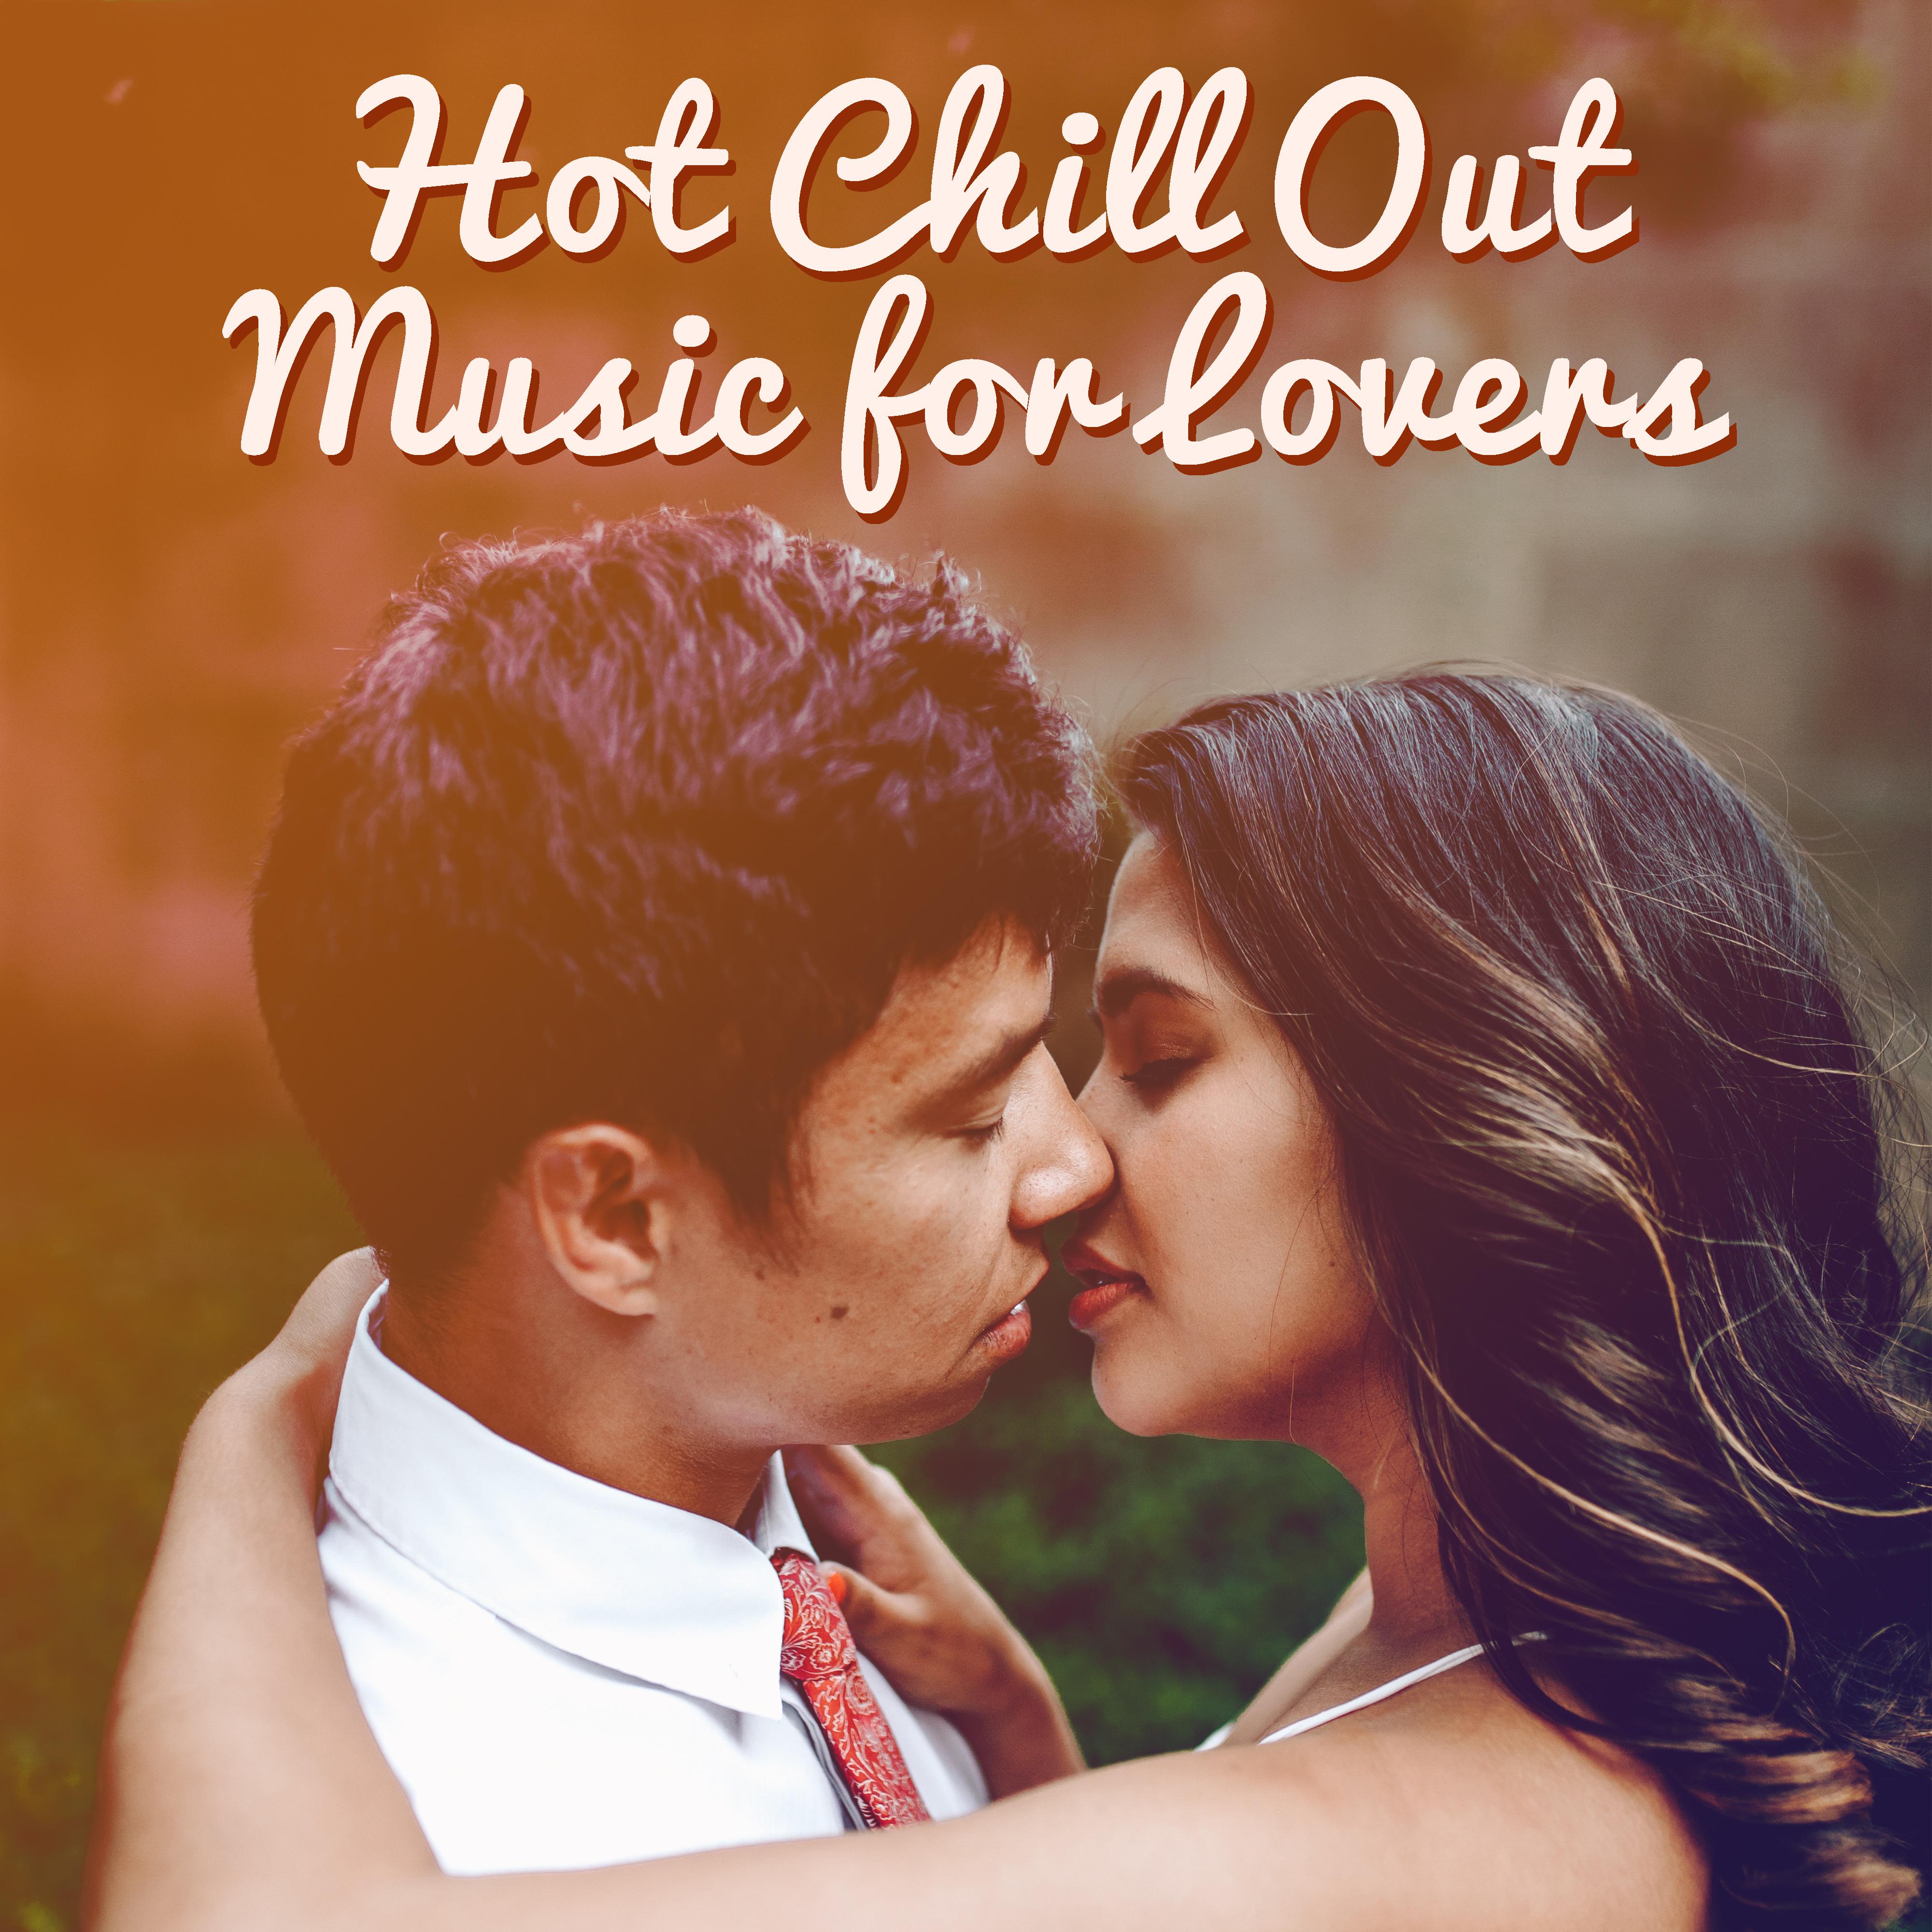 Hot Chill Out Music for Lovers – Holiday Hot Memories, Erotic Chill Out Music for Night, Romantic Beats